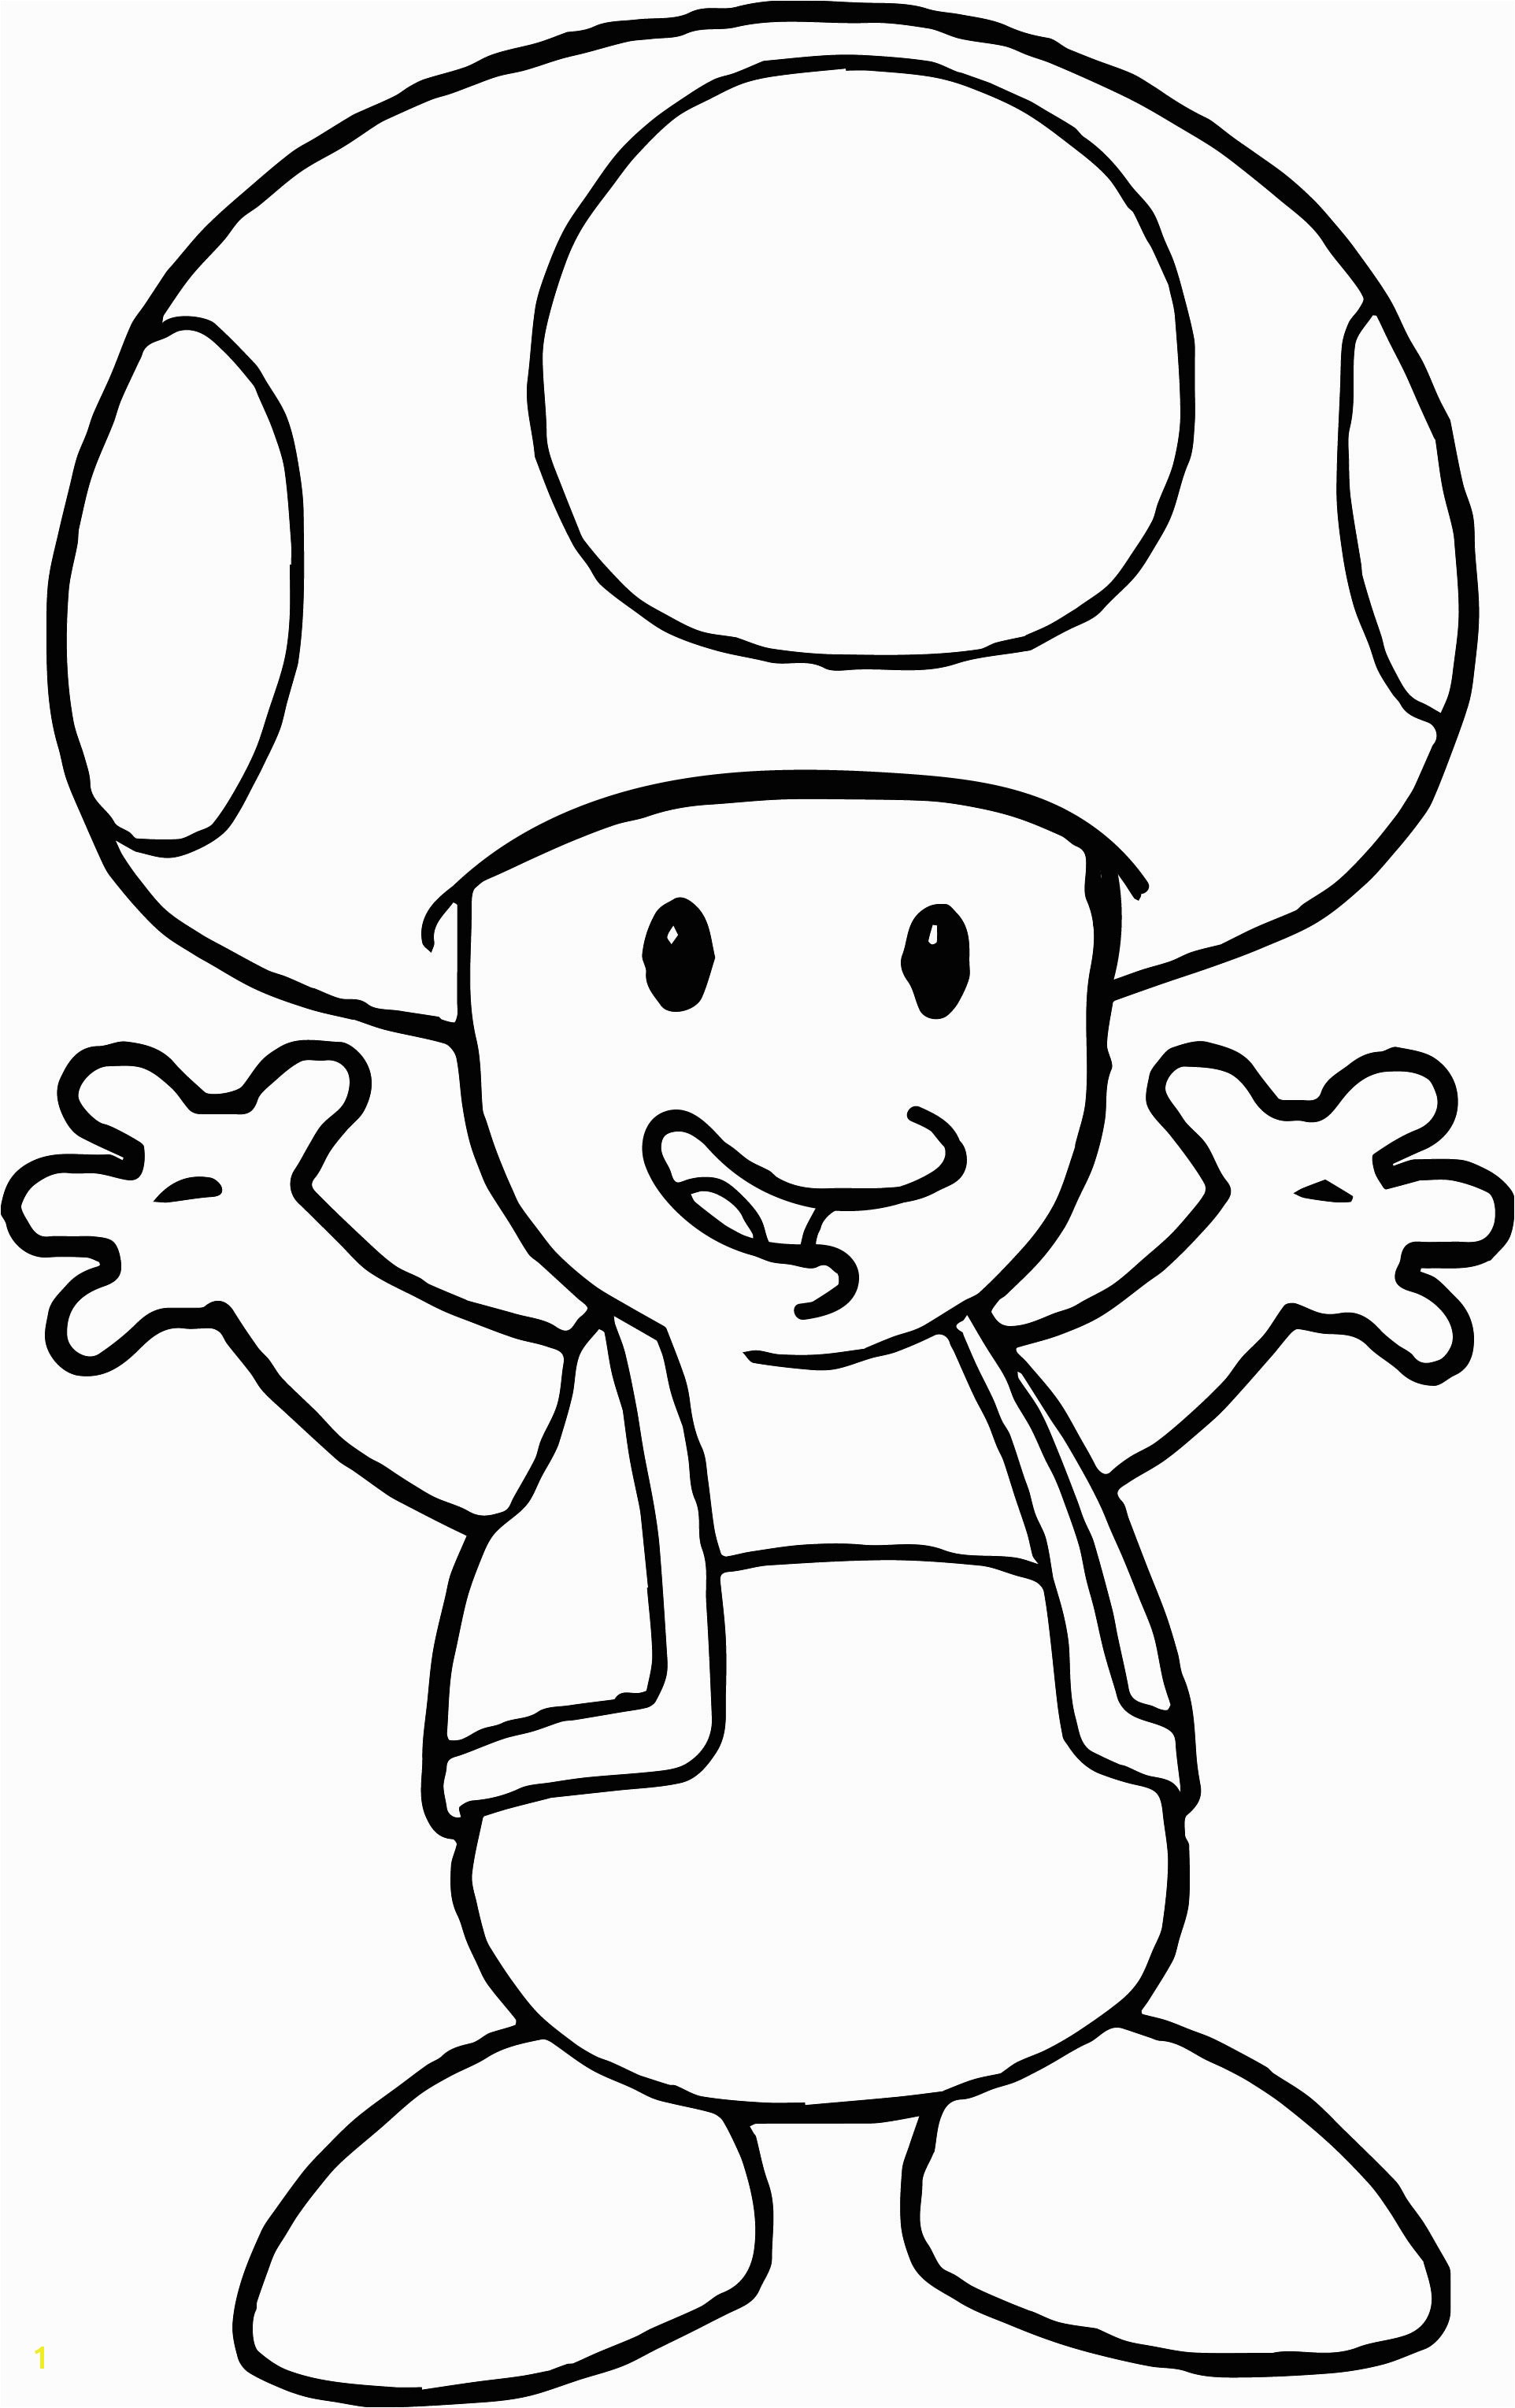 Captain toad Coloring Pages Nintendo toad Coloring Pages